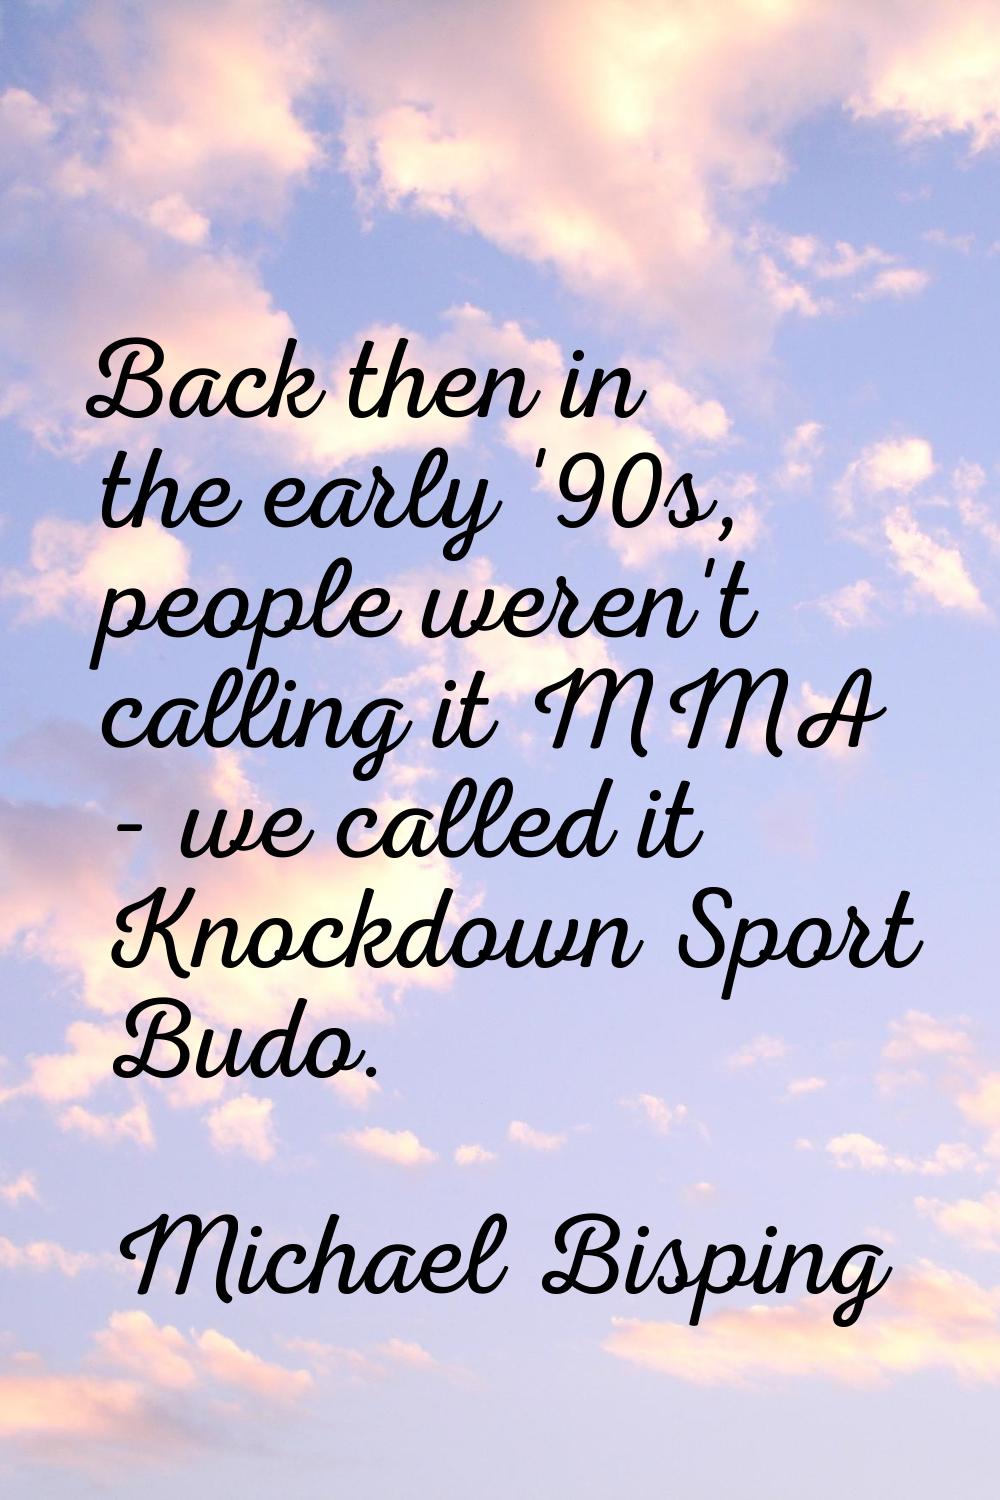 Back then in the early '90s, people weren't calling it MMA - we called it Knockdown Sport Budo.